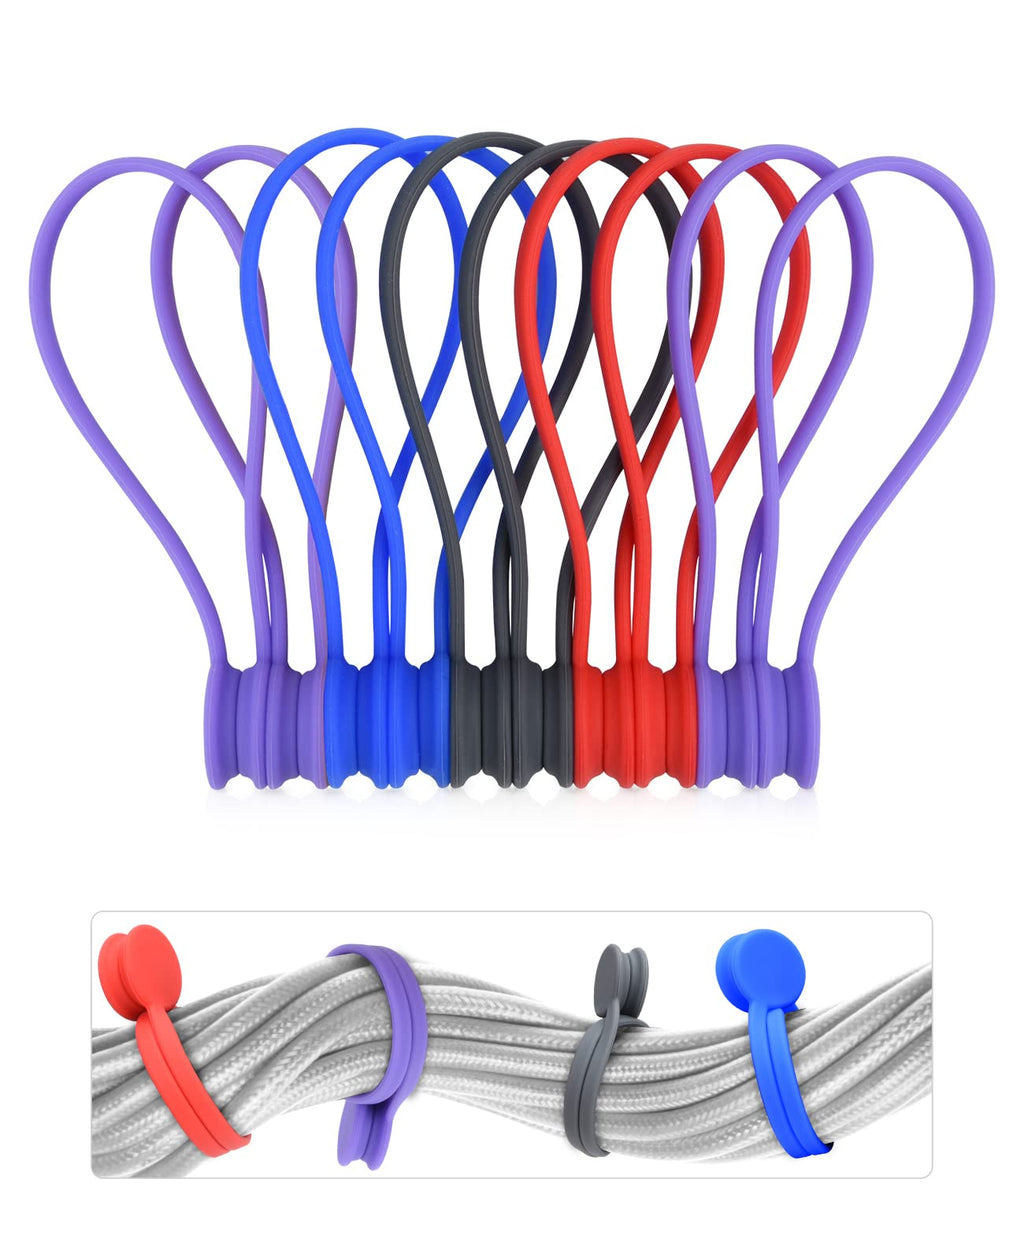  [AUSTRALIA] - 10 PCS Silicone Magnetic Cable Ties, Cable Clips Cord Organizer [1S] Management cable Cords, Reusable Magnet Cable Organizer, Phone Cord Holder for Organizing, Bookmark Whiteboard Fridge Magnets etc